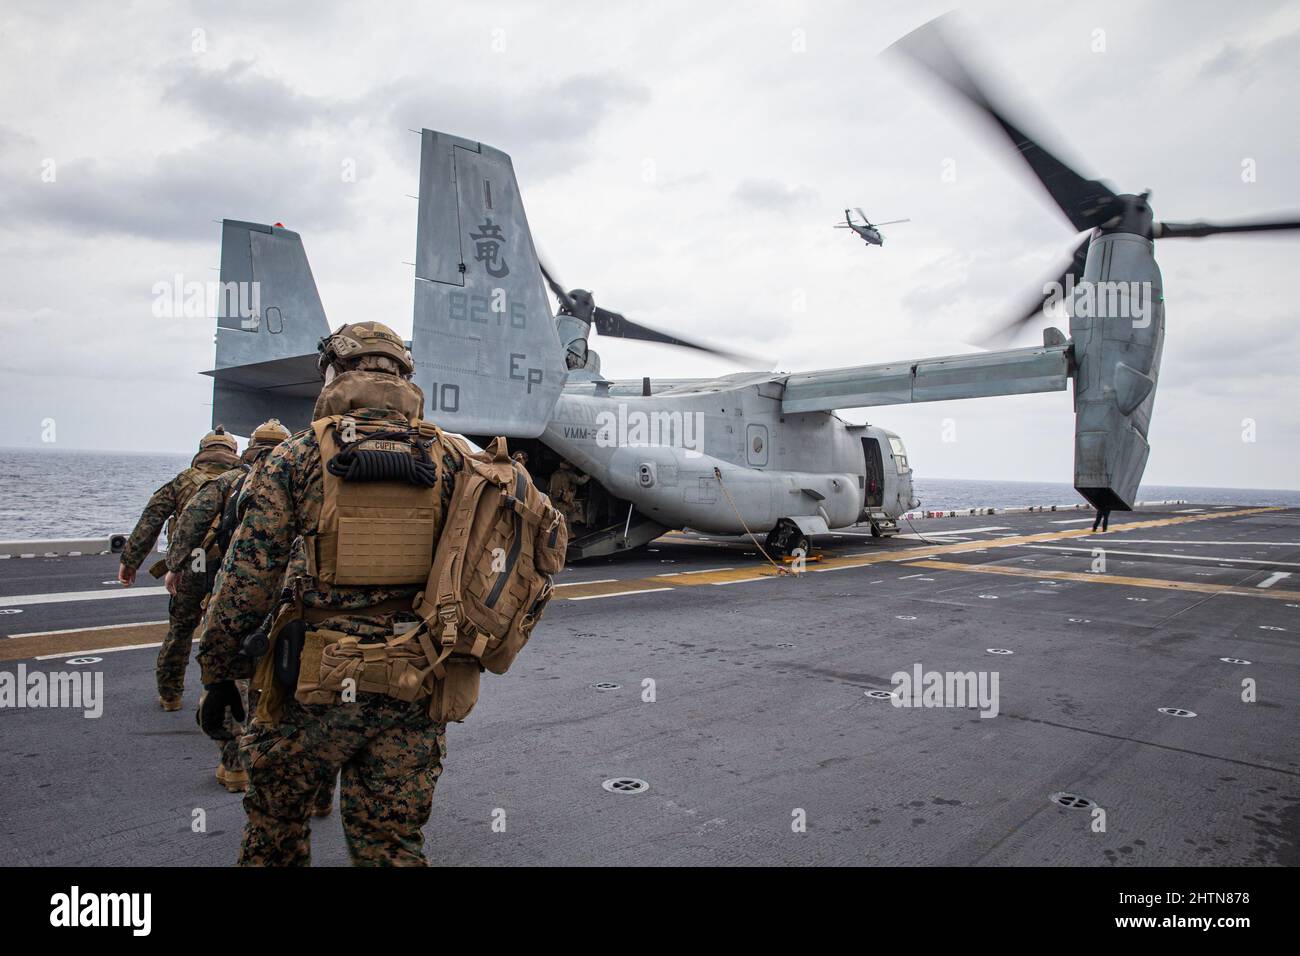 U.S Marines with Battalion Landing Team 1/5, 31st Marine Expeditionary Unit (MEU), board an MV-22B Osprey before conducting a helo-cast training exercise, aboard amphibious assault ship USS America (LHA 6), Feb. 17, 2022. The training exercise consisted of Marines jumping out of a low altitude CH-53E Super Stallion helicopter into the water, then climbing aboard an inflatable, motorized aircraft. The 31st MEU is operating aboard ships of Amphibious Ready Group in the 7th fleet area of operations to enhance interoperability with allies and partners and serve as a ready response force to defend Stock Photo